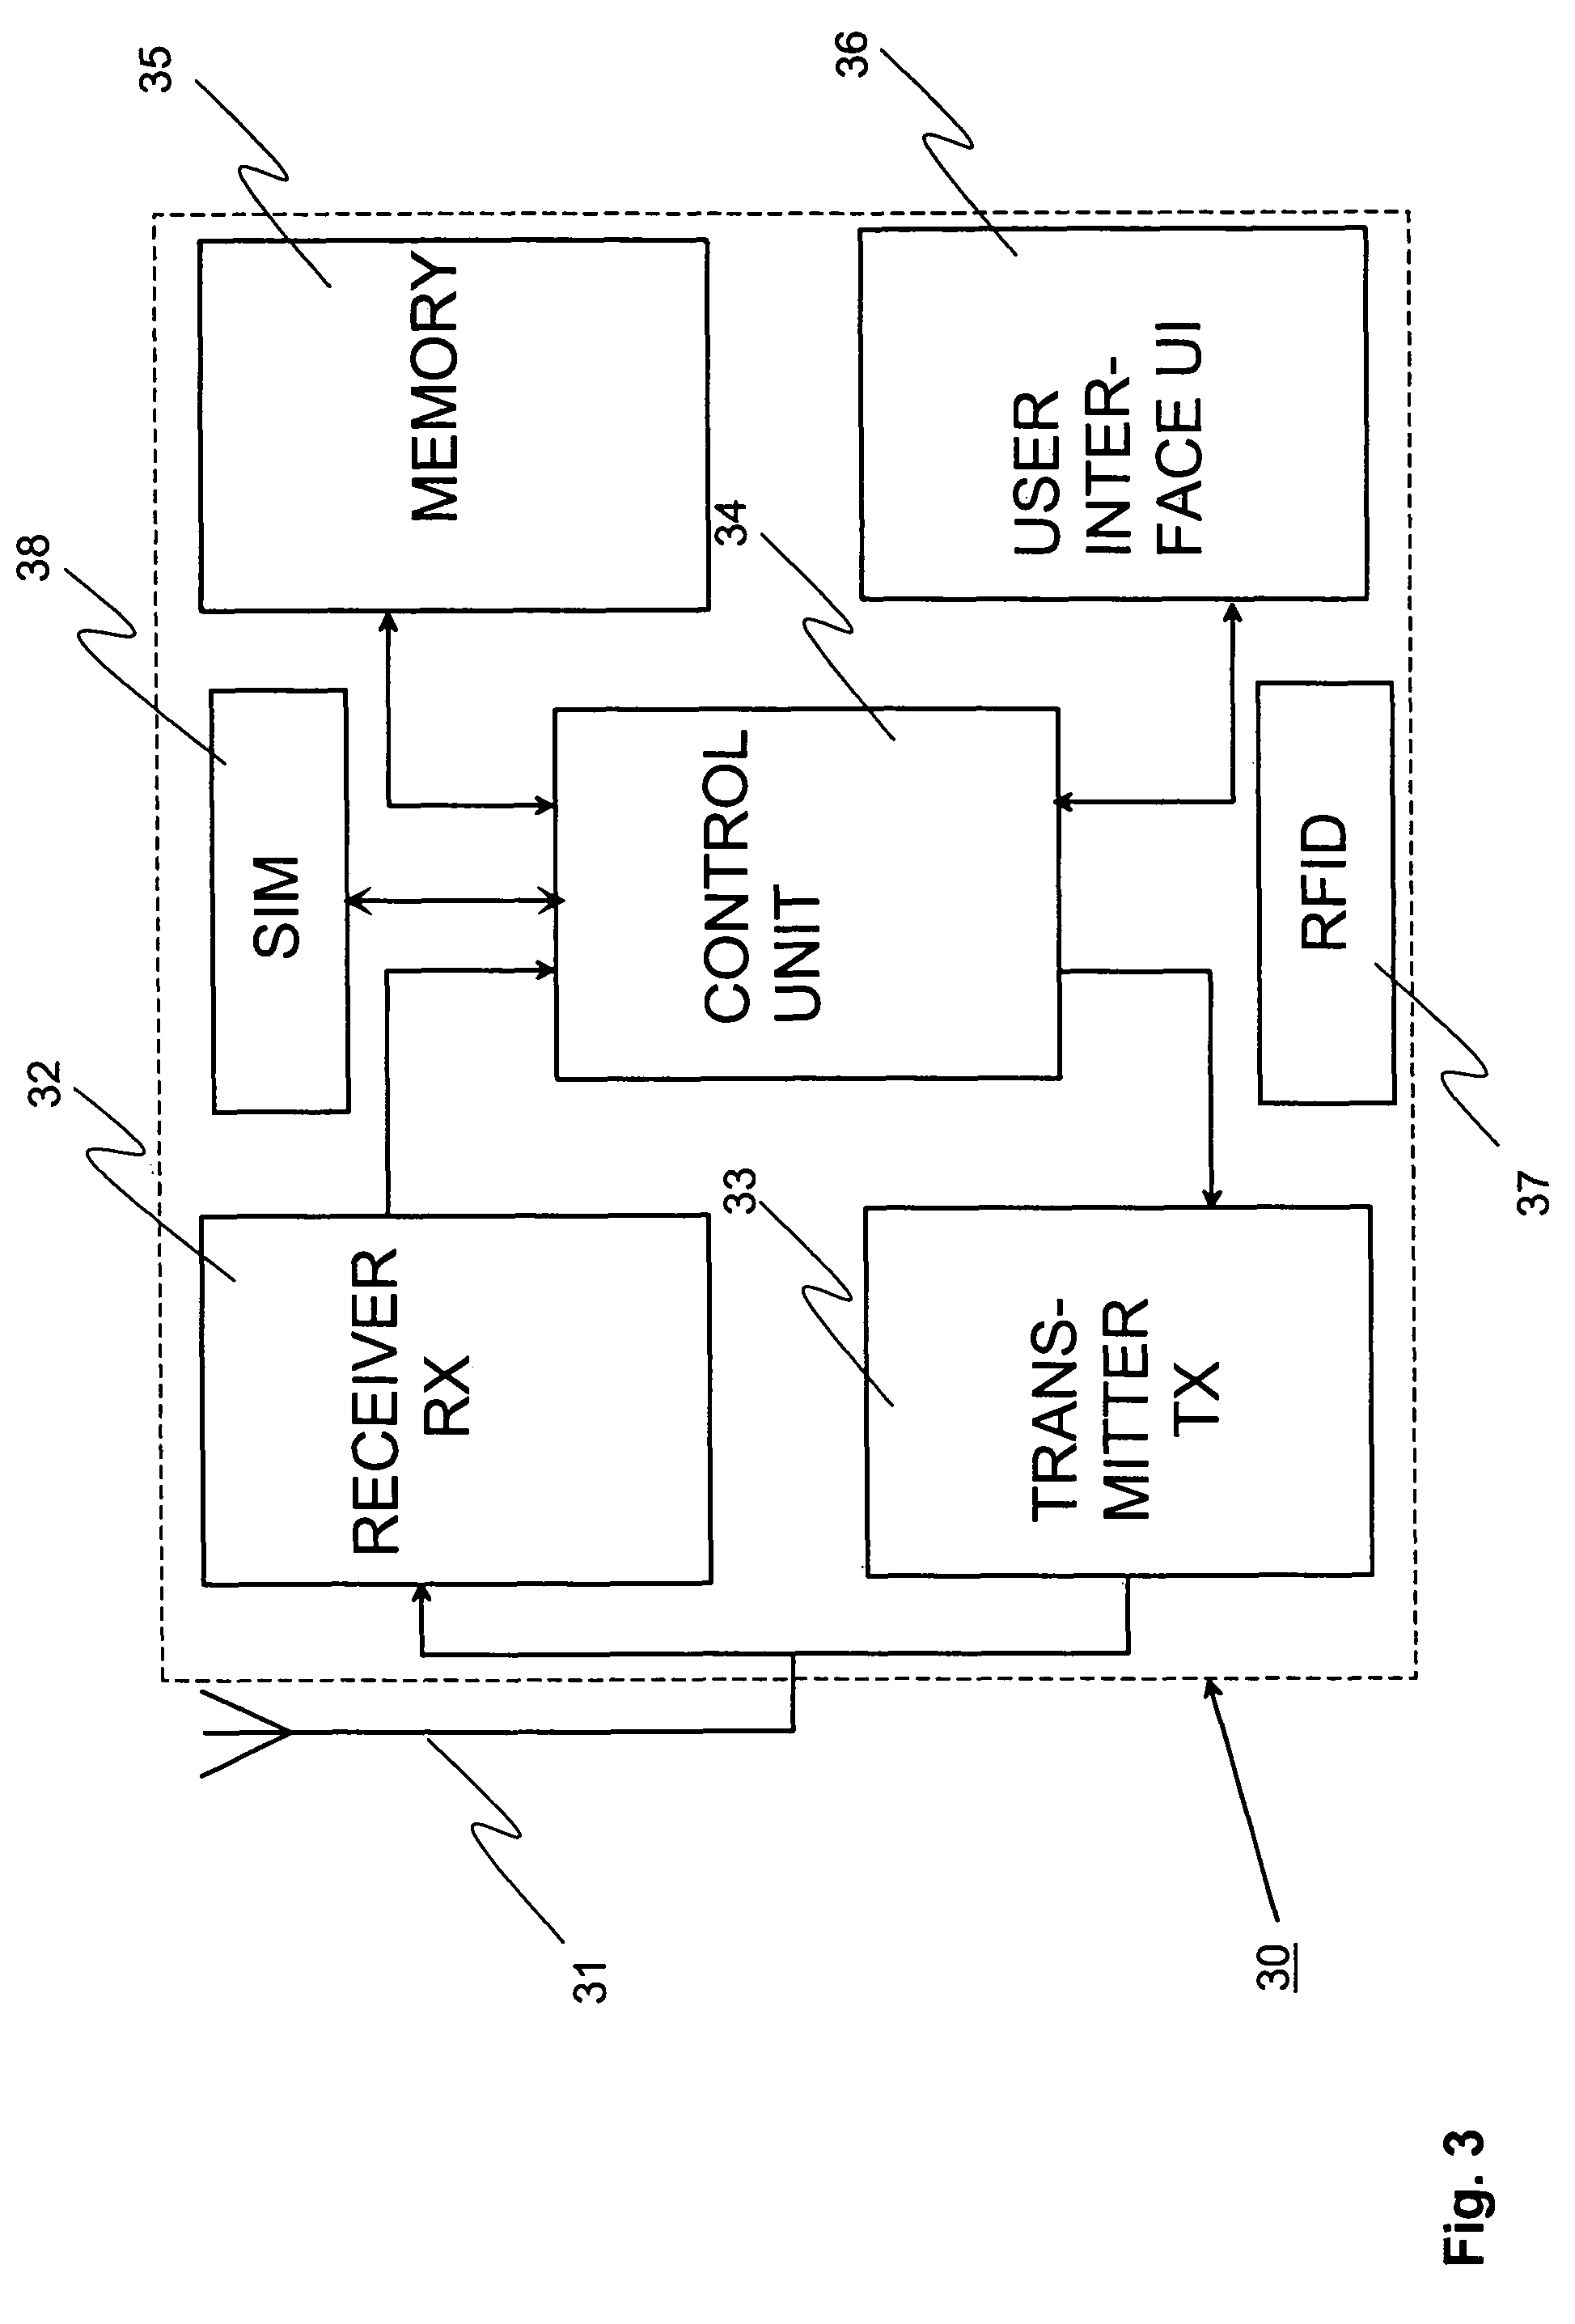 Method and arrangement for realizing a prepaid subscription and a prepayment terminal and a cellular network terminal utilizing the method